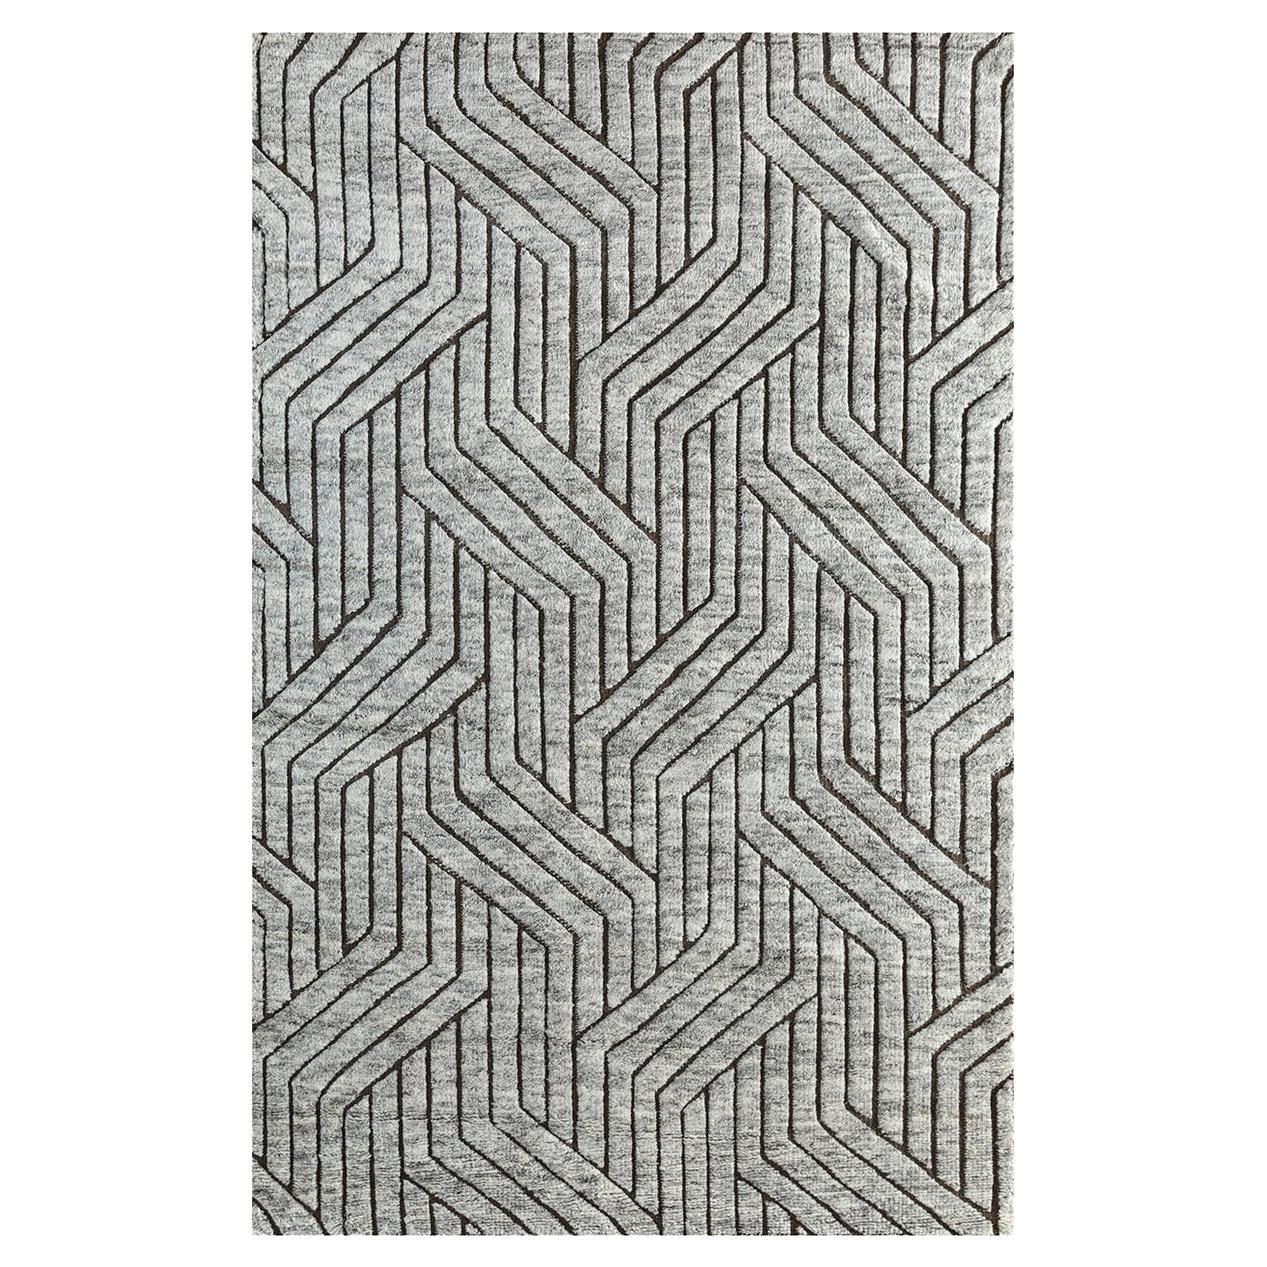 Weave Rug by Rural Weavers, Knotted, Wool, 240x300cm For Sale